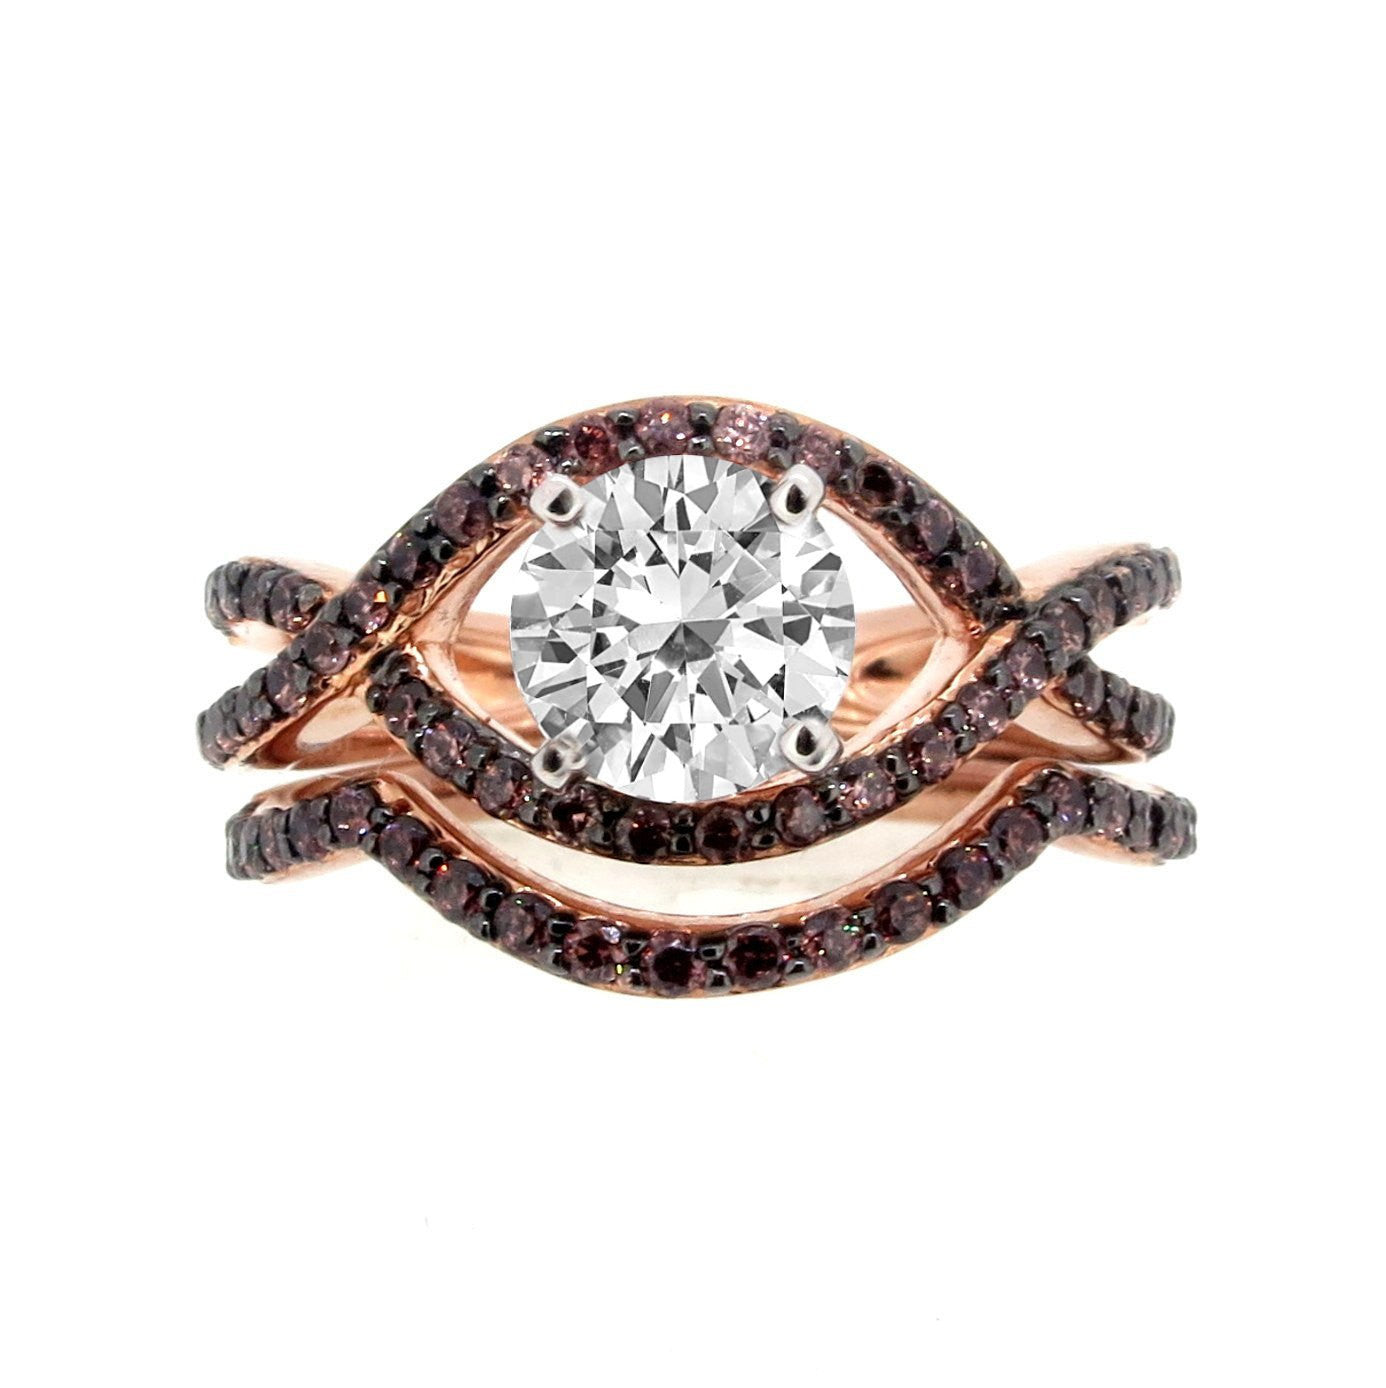 Special order for Nancy: Unique Infinity Ring, Engagement / 2  Wedding Bands Set, Rose Gold, Chocolate Color Brown And White Diamonds, 1 Carat Forever Brilliant Moissanite - FB94615